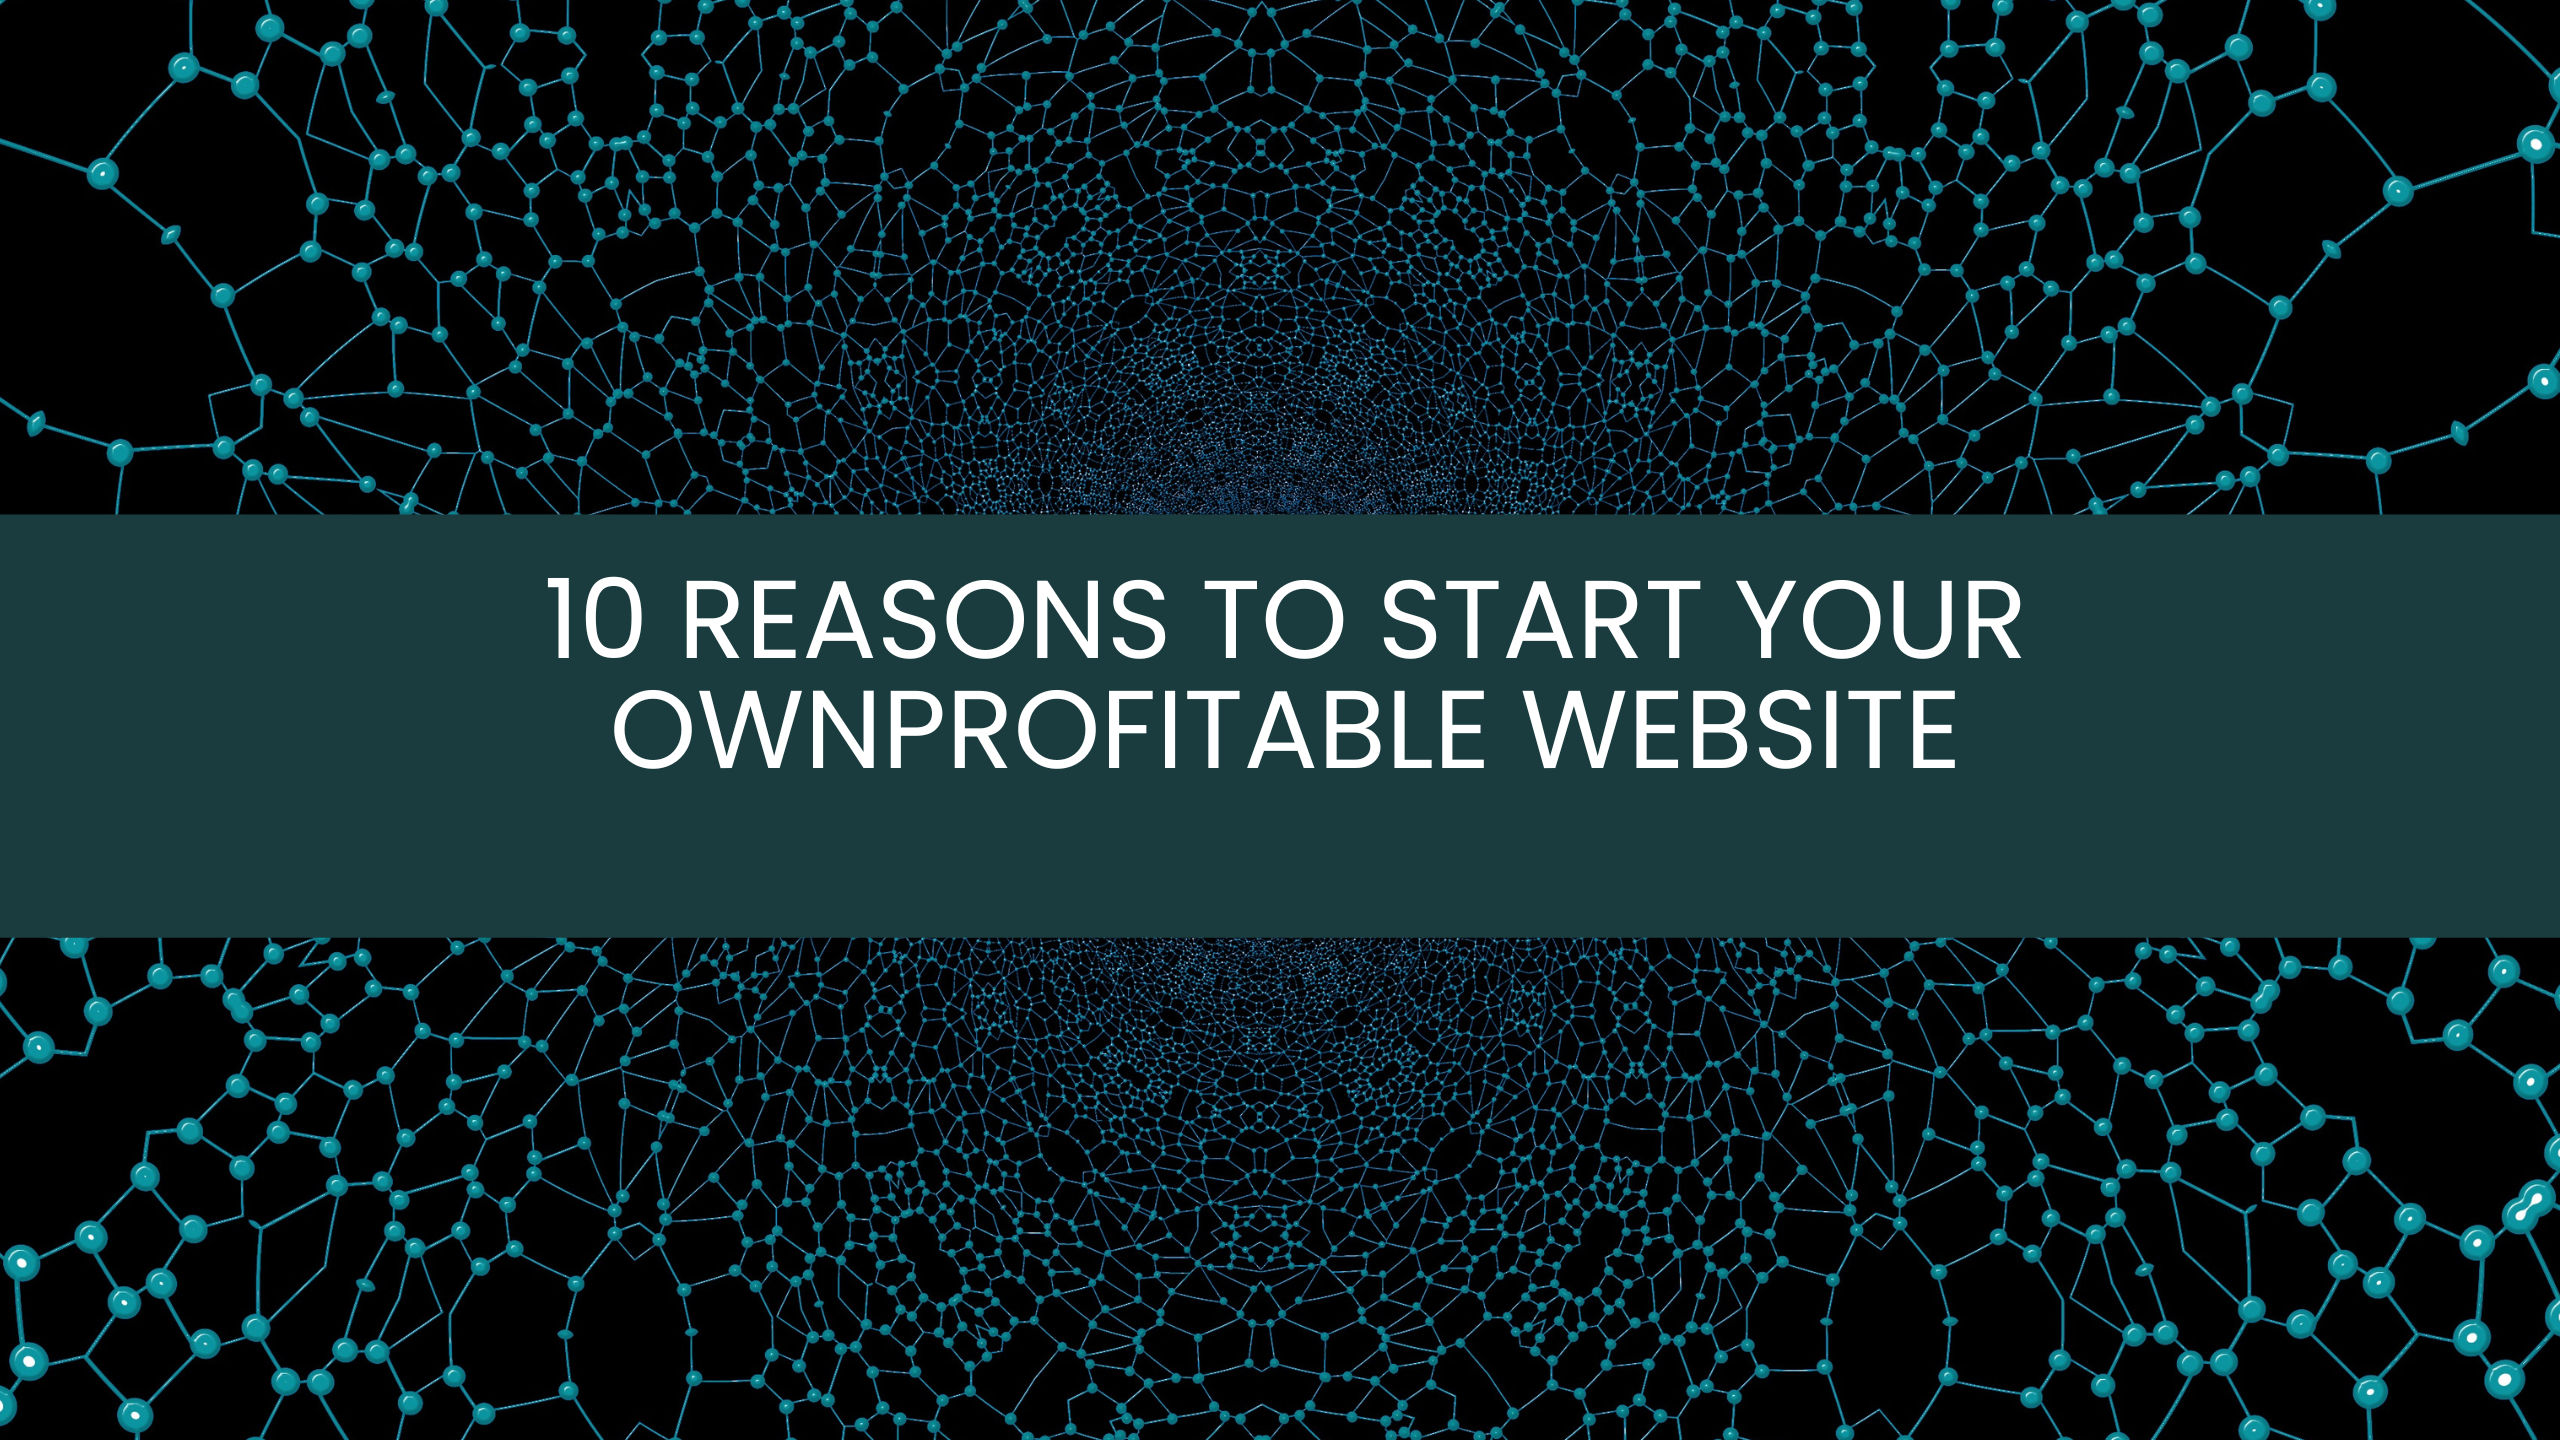 10 reasons to start your own profitable website